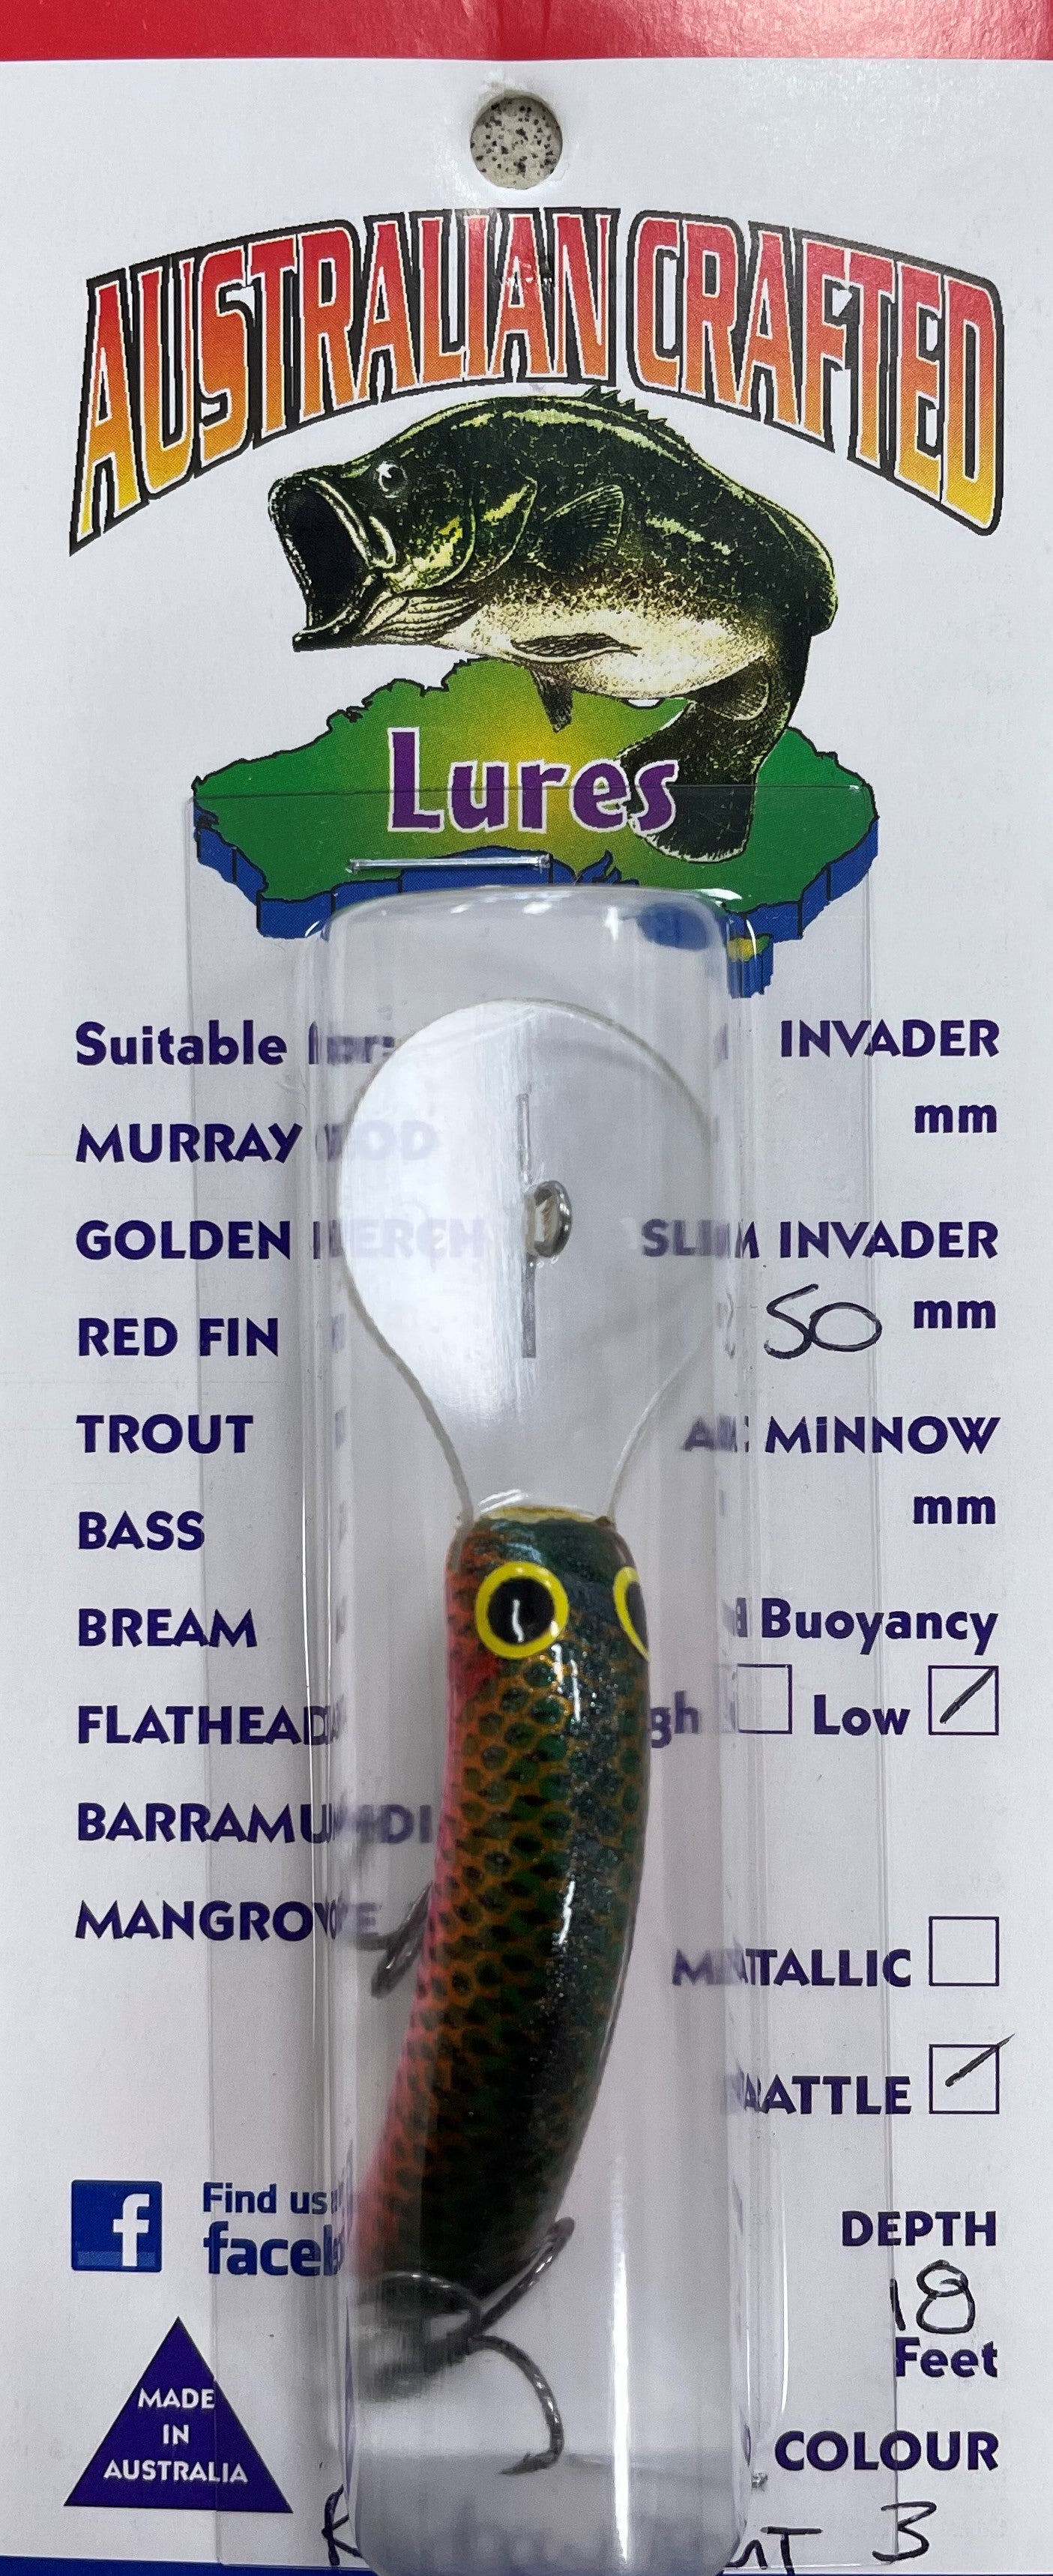 Australian Crafted Lures - Slim Invader 50mm 18ft (#3 Rainbow Trout)